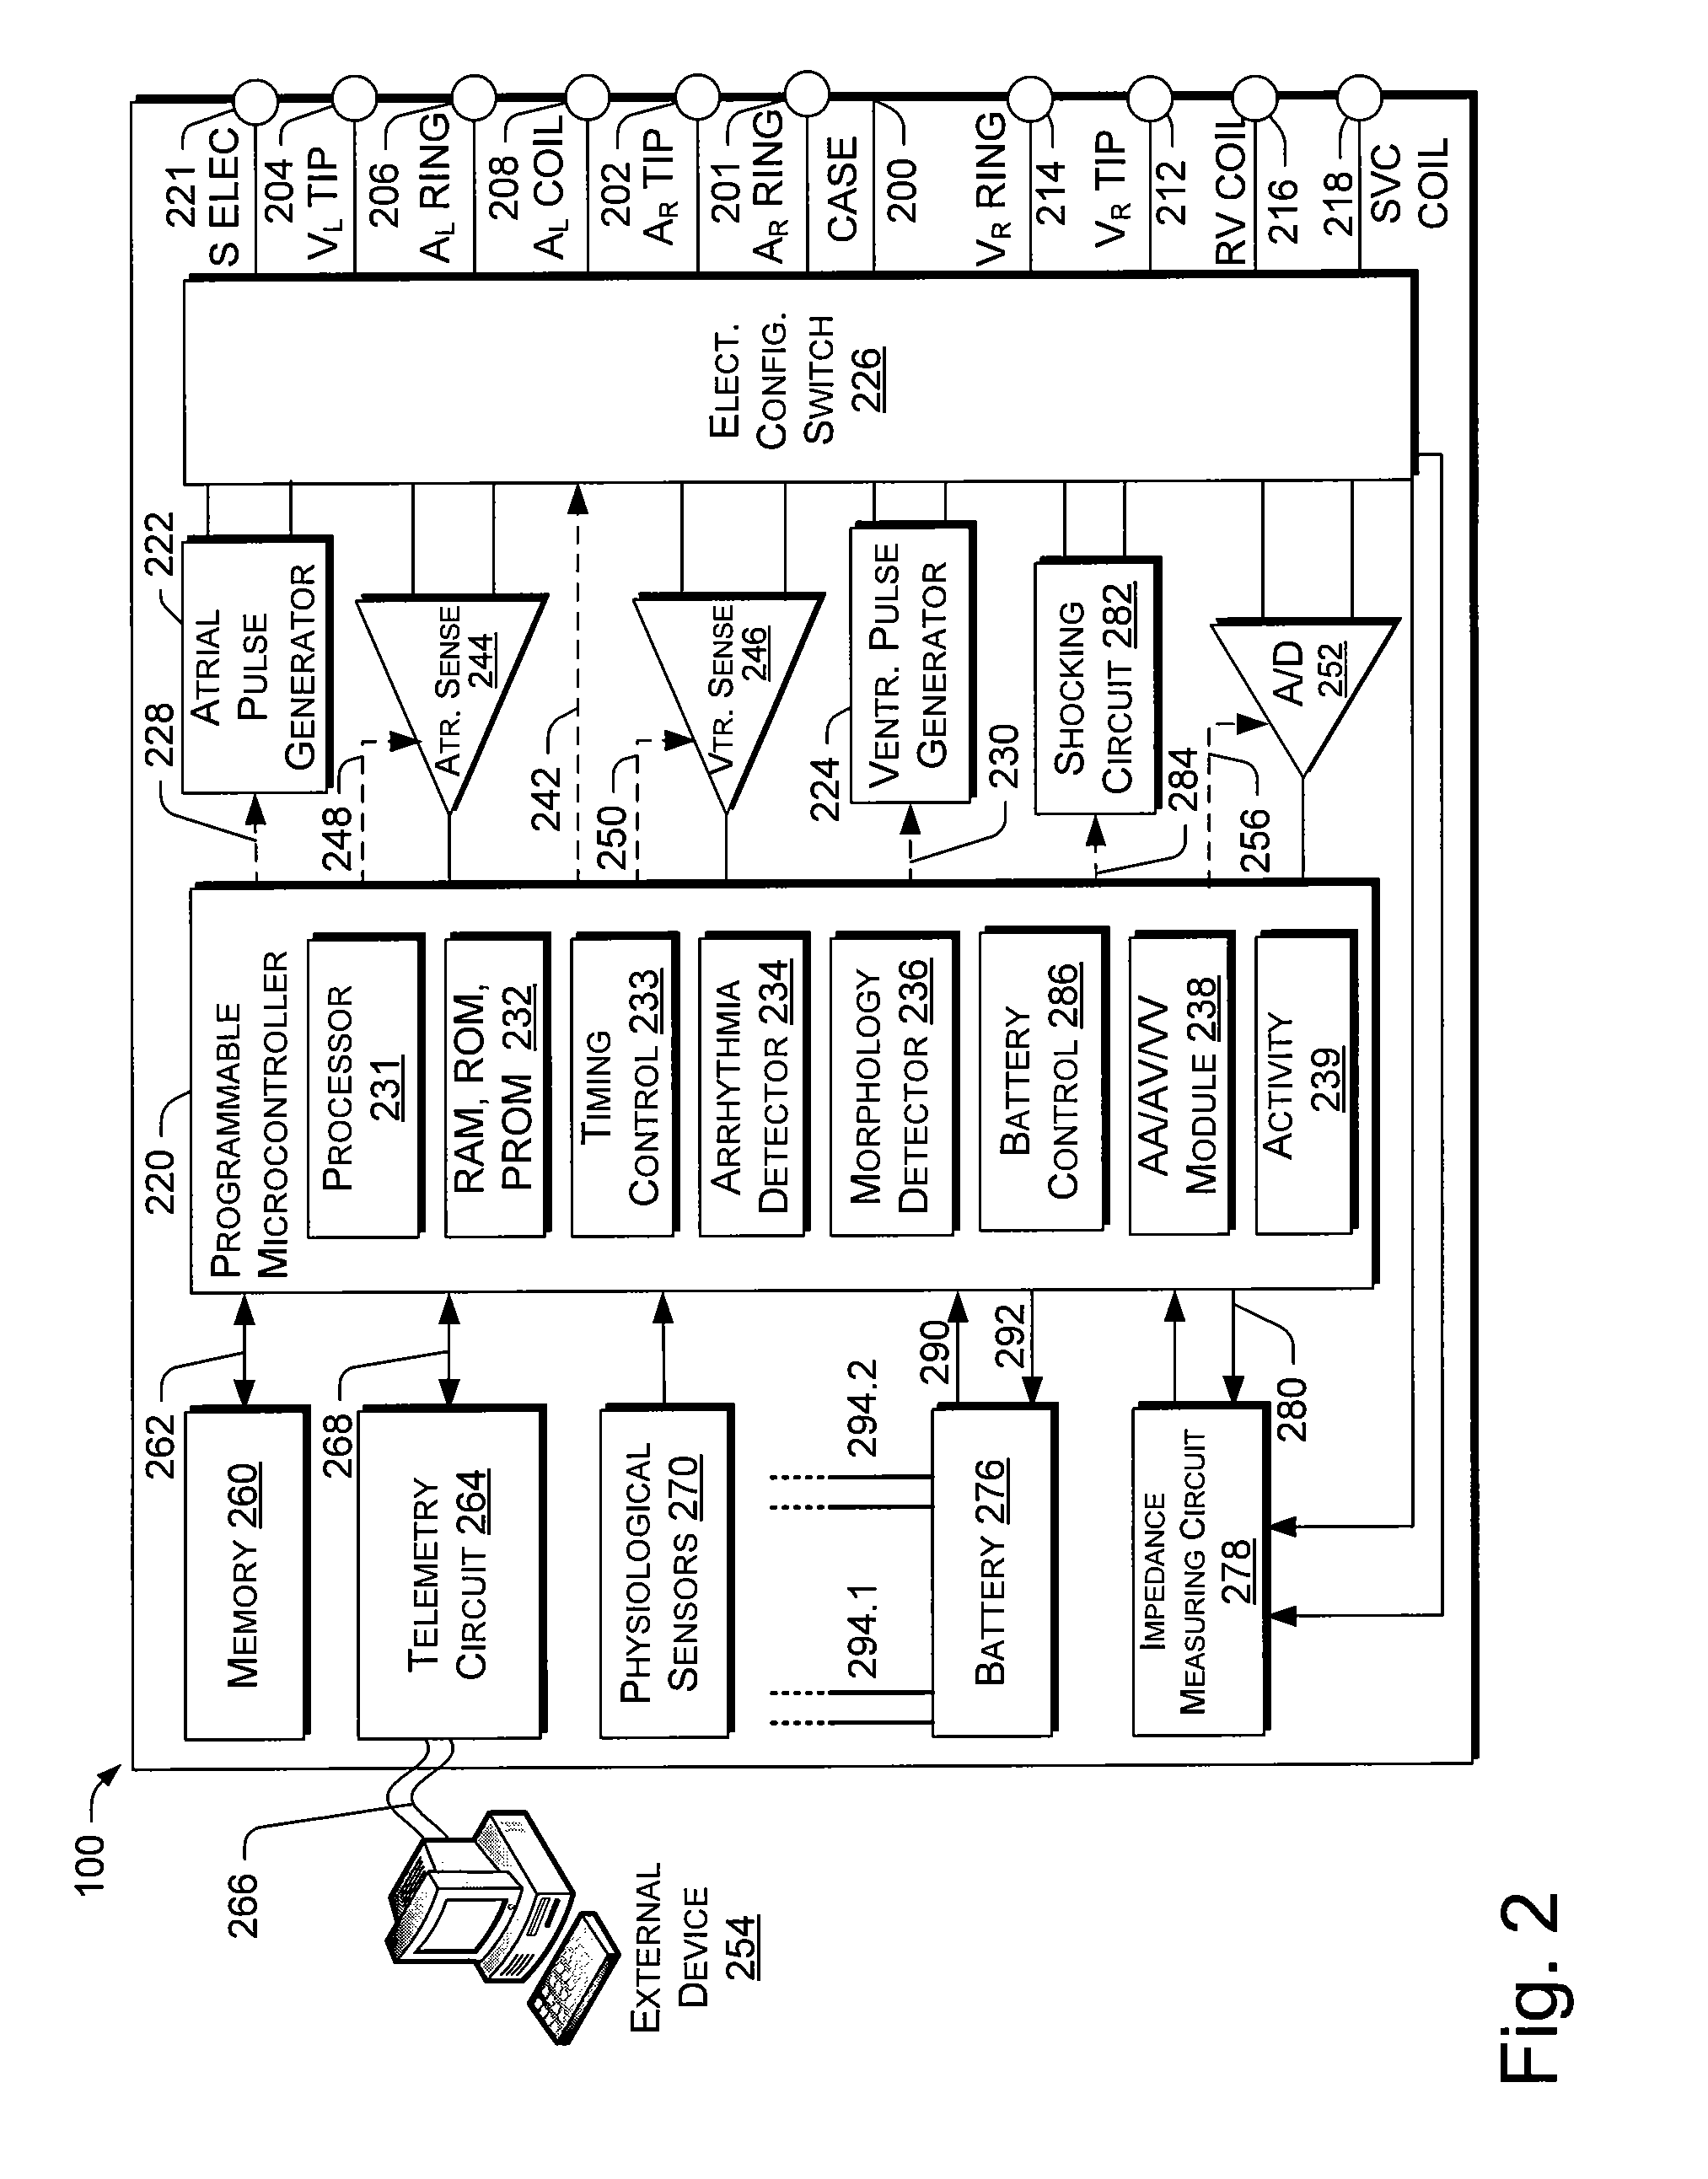 Hybrid battery system for implantable cardiac therapy device